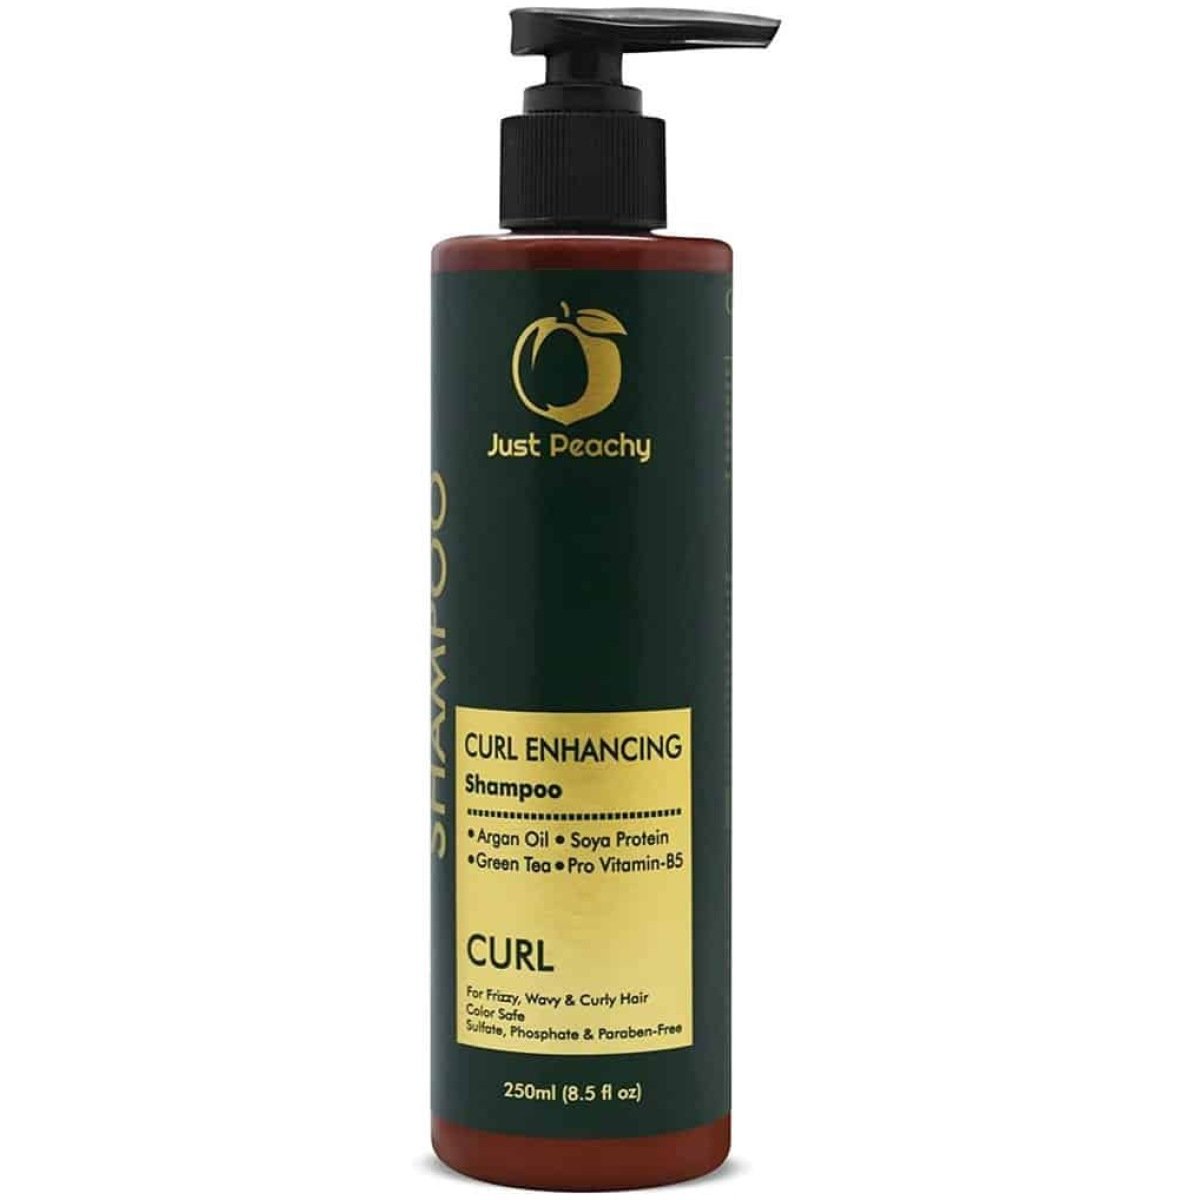 Just Peachy Curl Enhancing Shampoo Moroccan Argan Oil Vitamin B5 Color Safe For Frizzy Wavy & Curly Hair 250ml